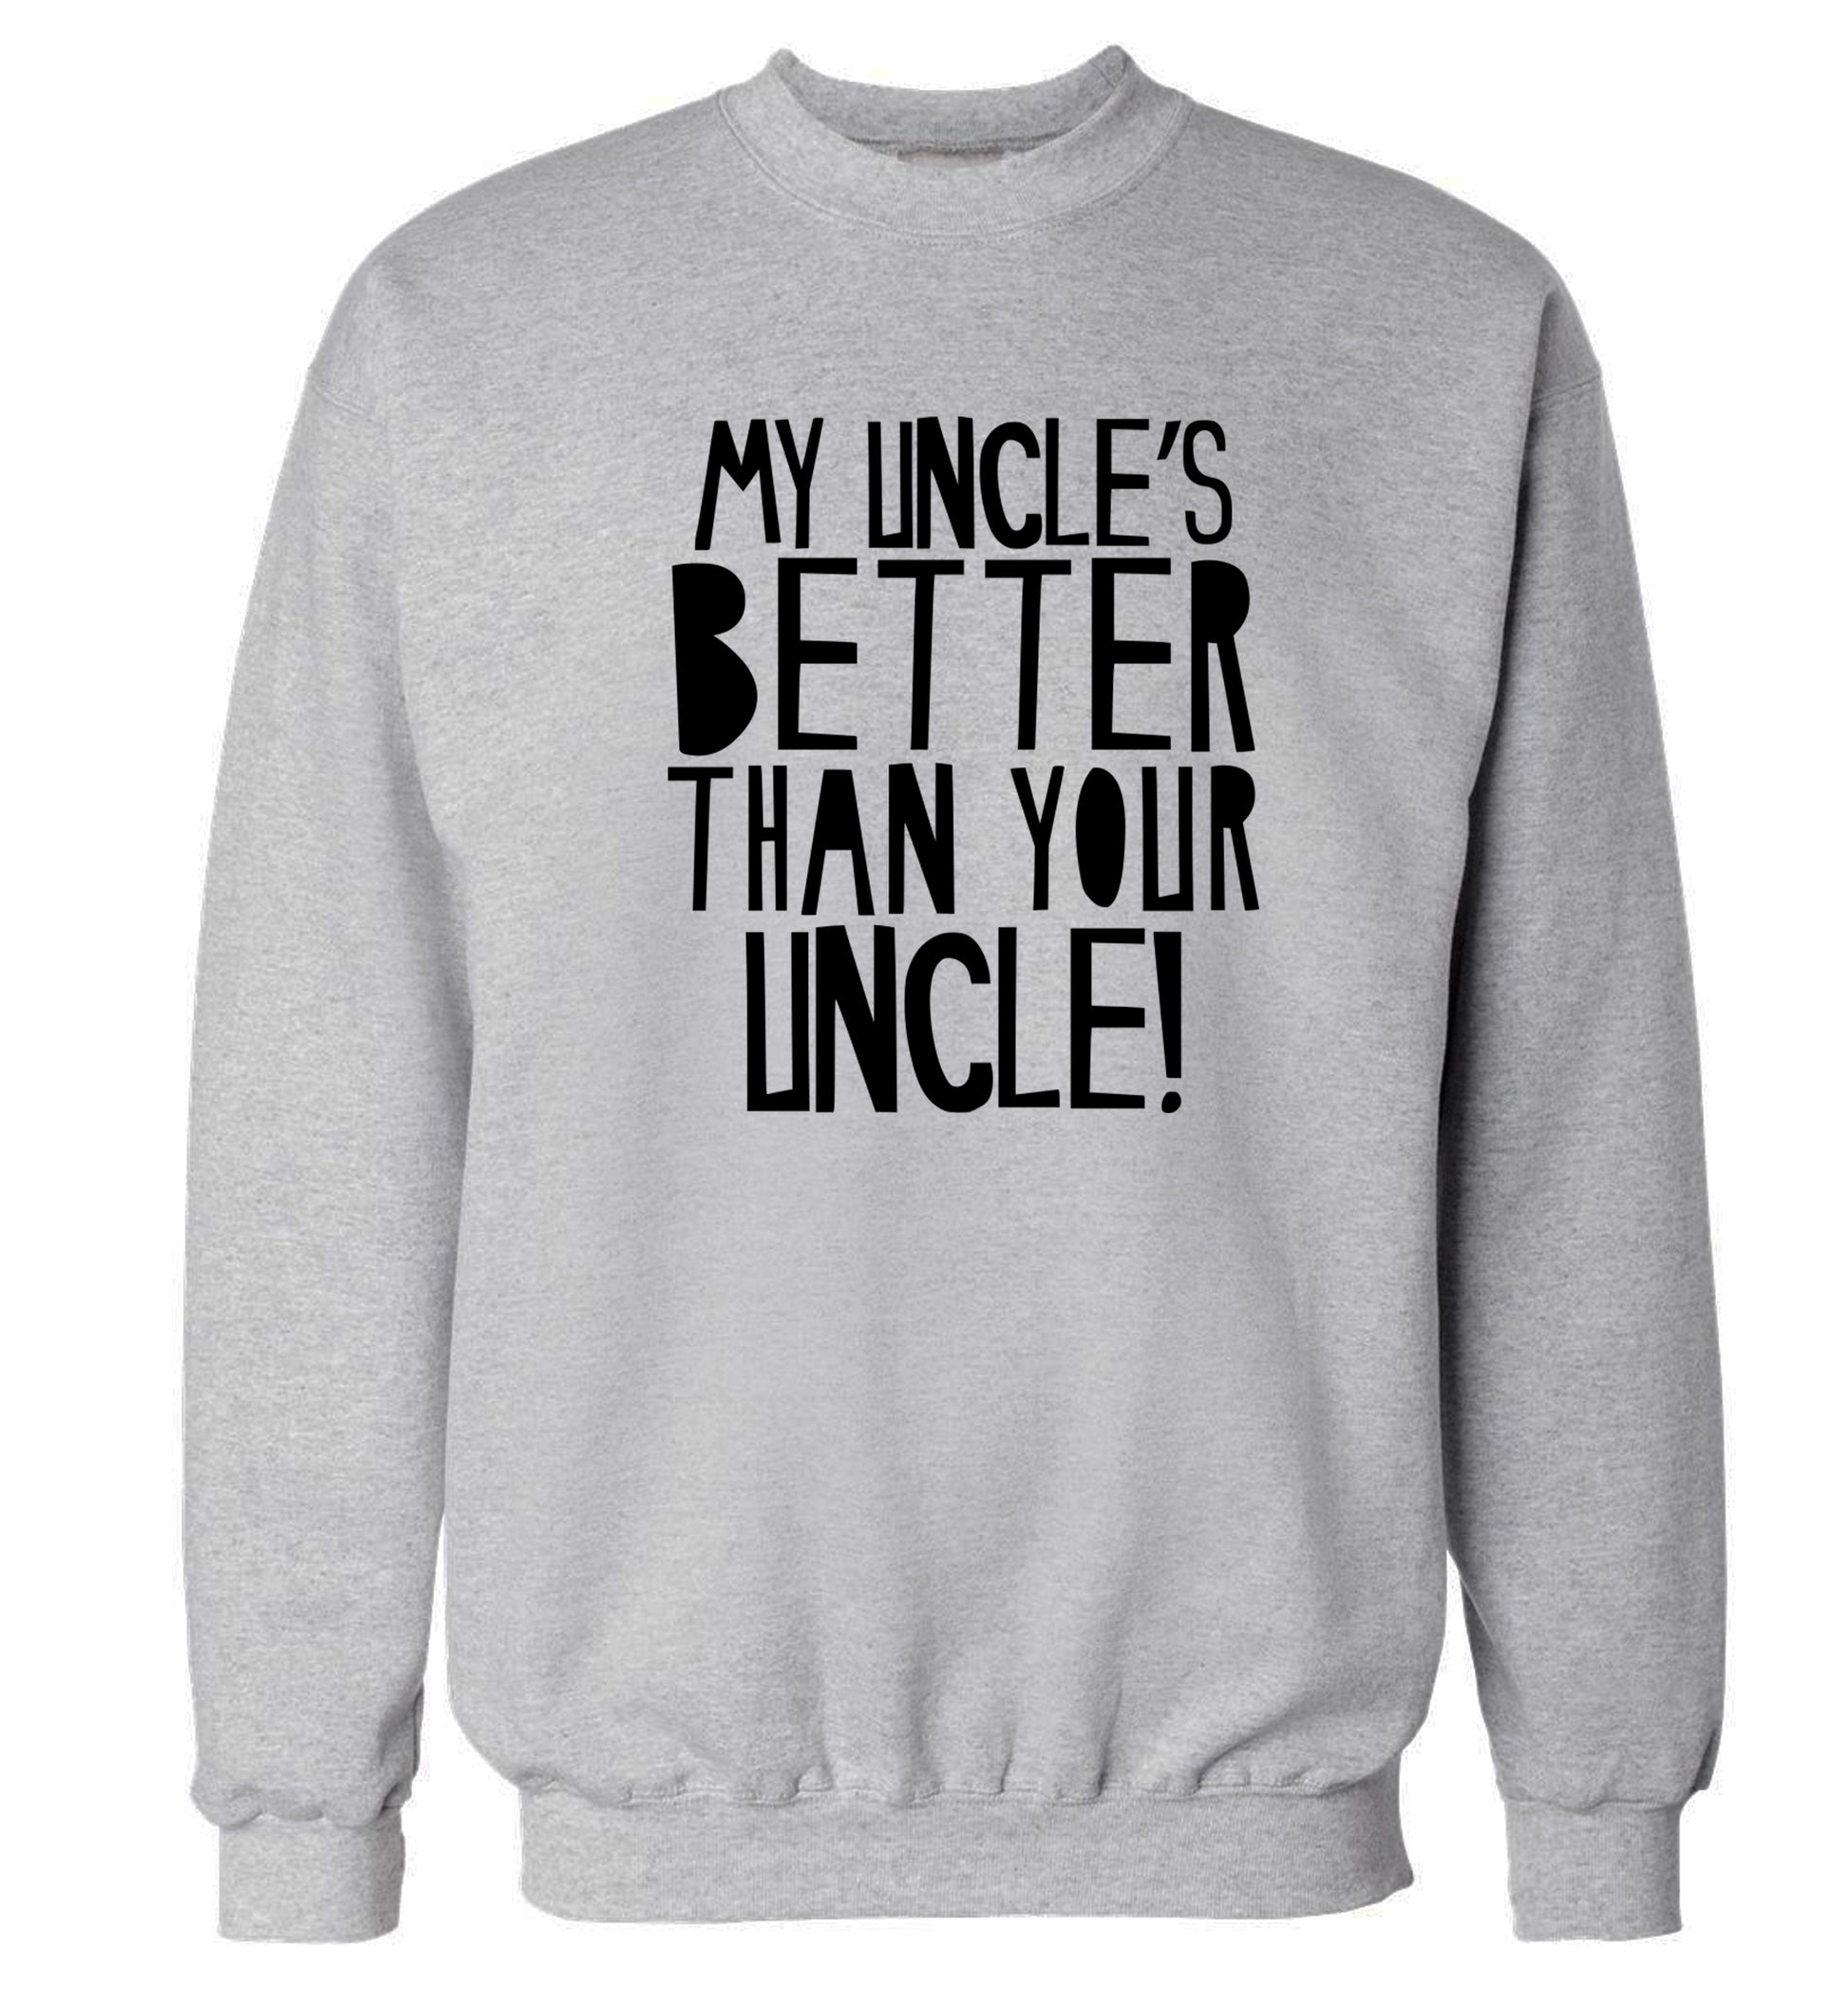 My uncles better than your uncle Adult's unisex grey Sweater 2XL